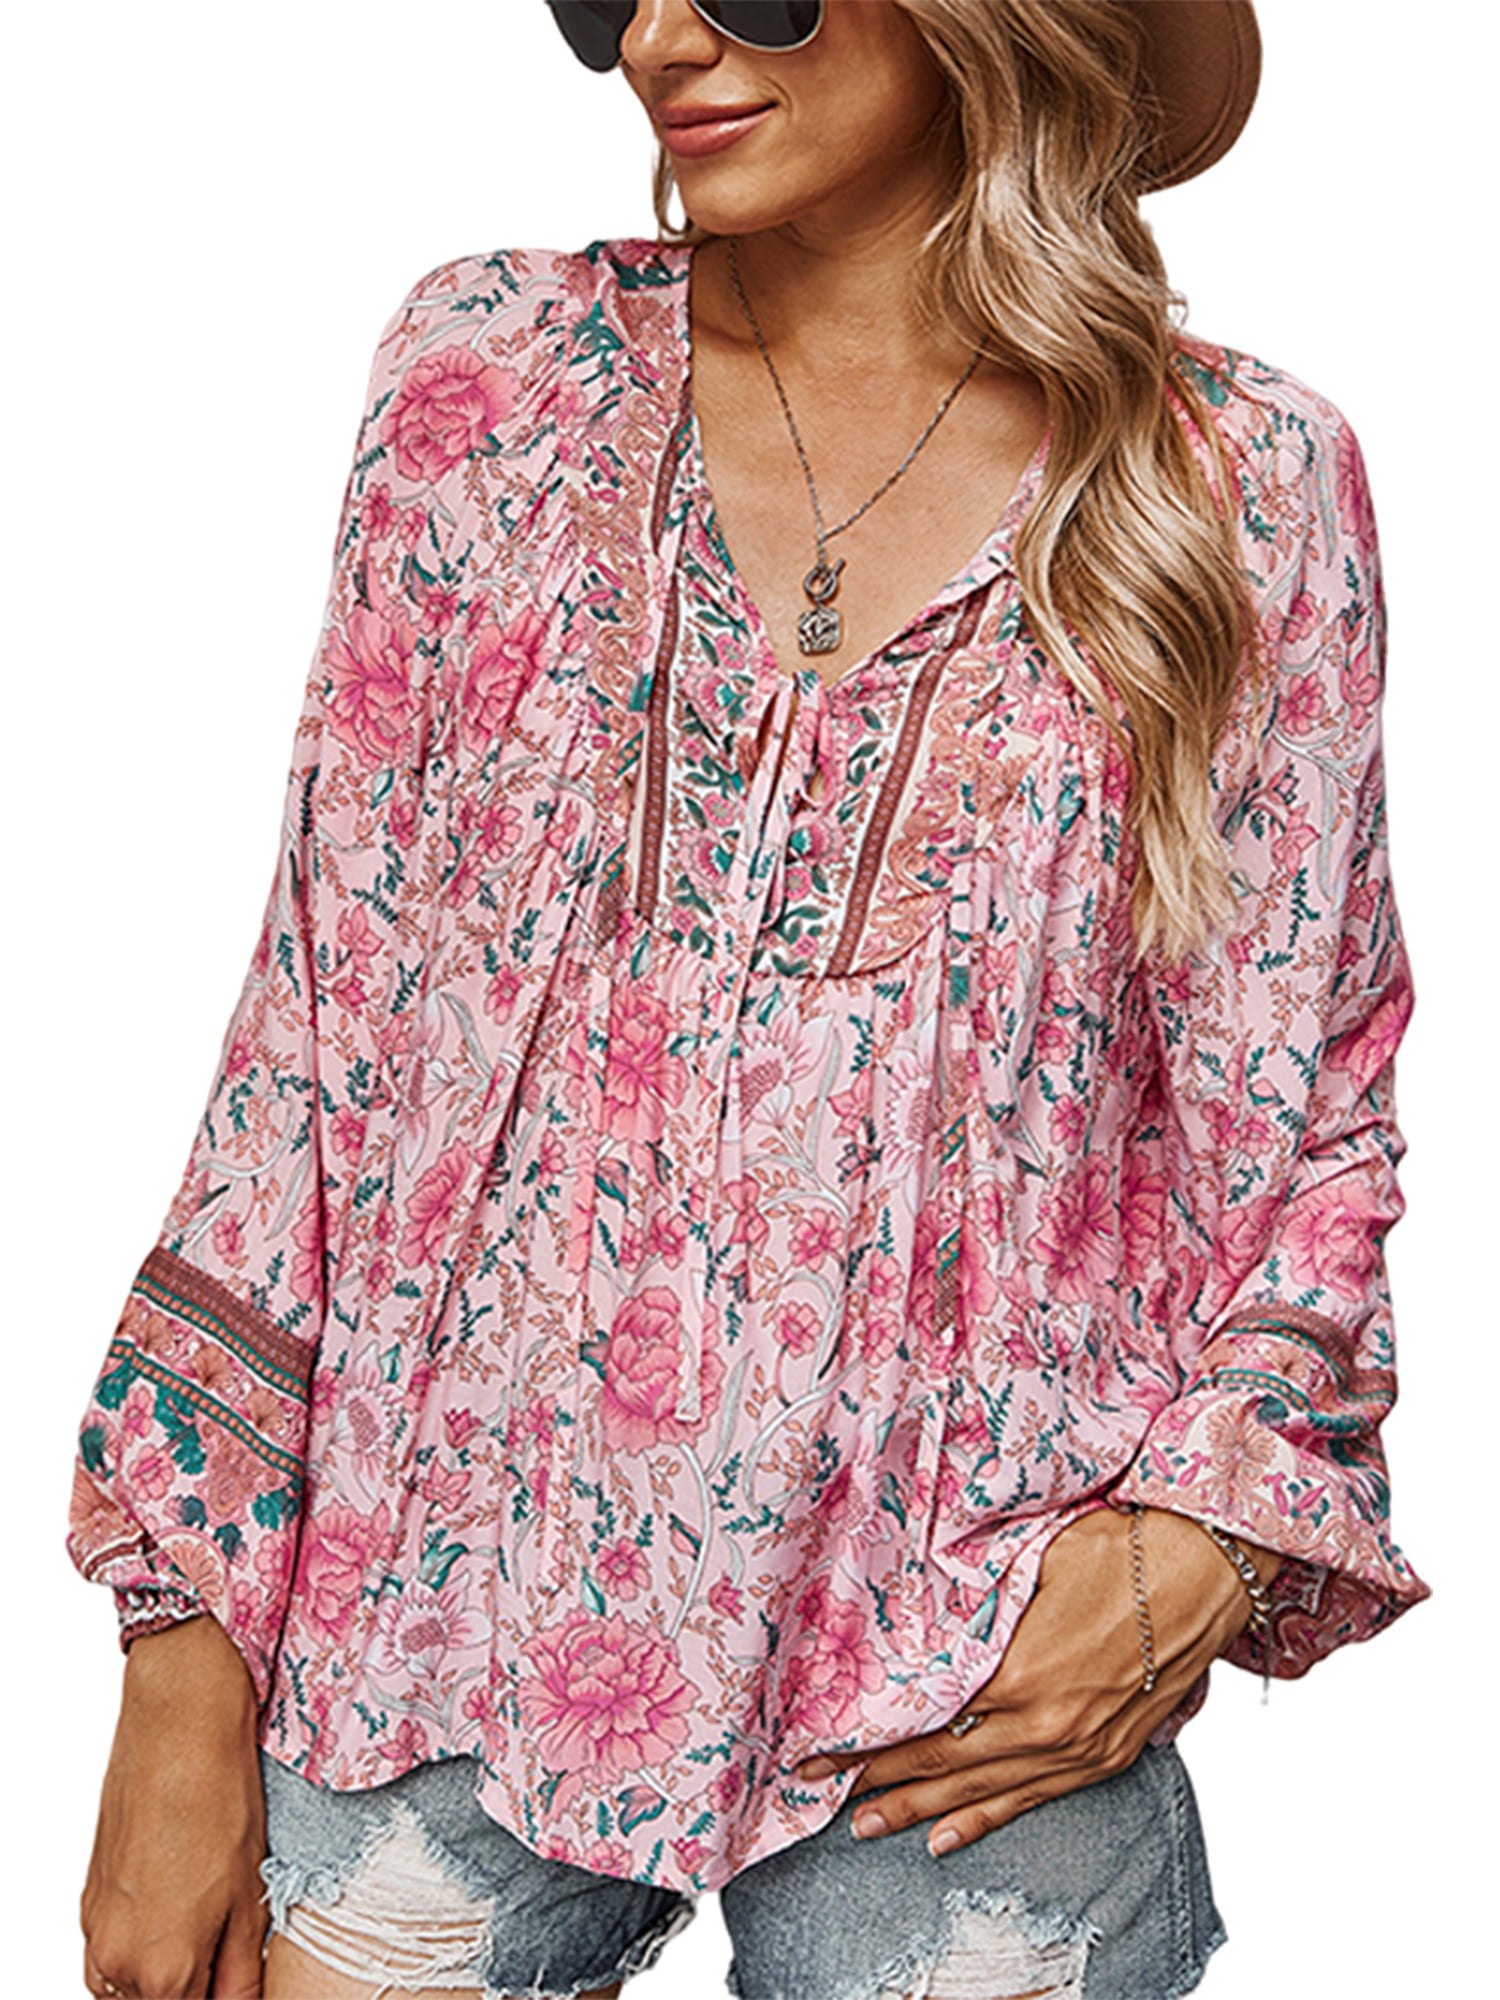 Floral Print Shirts for Womens Casual ...